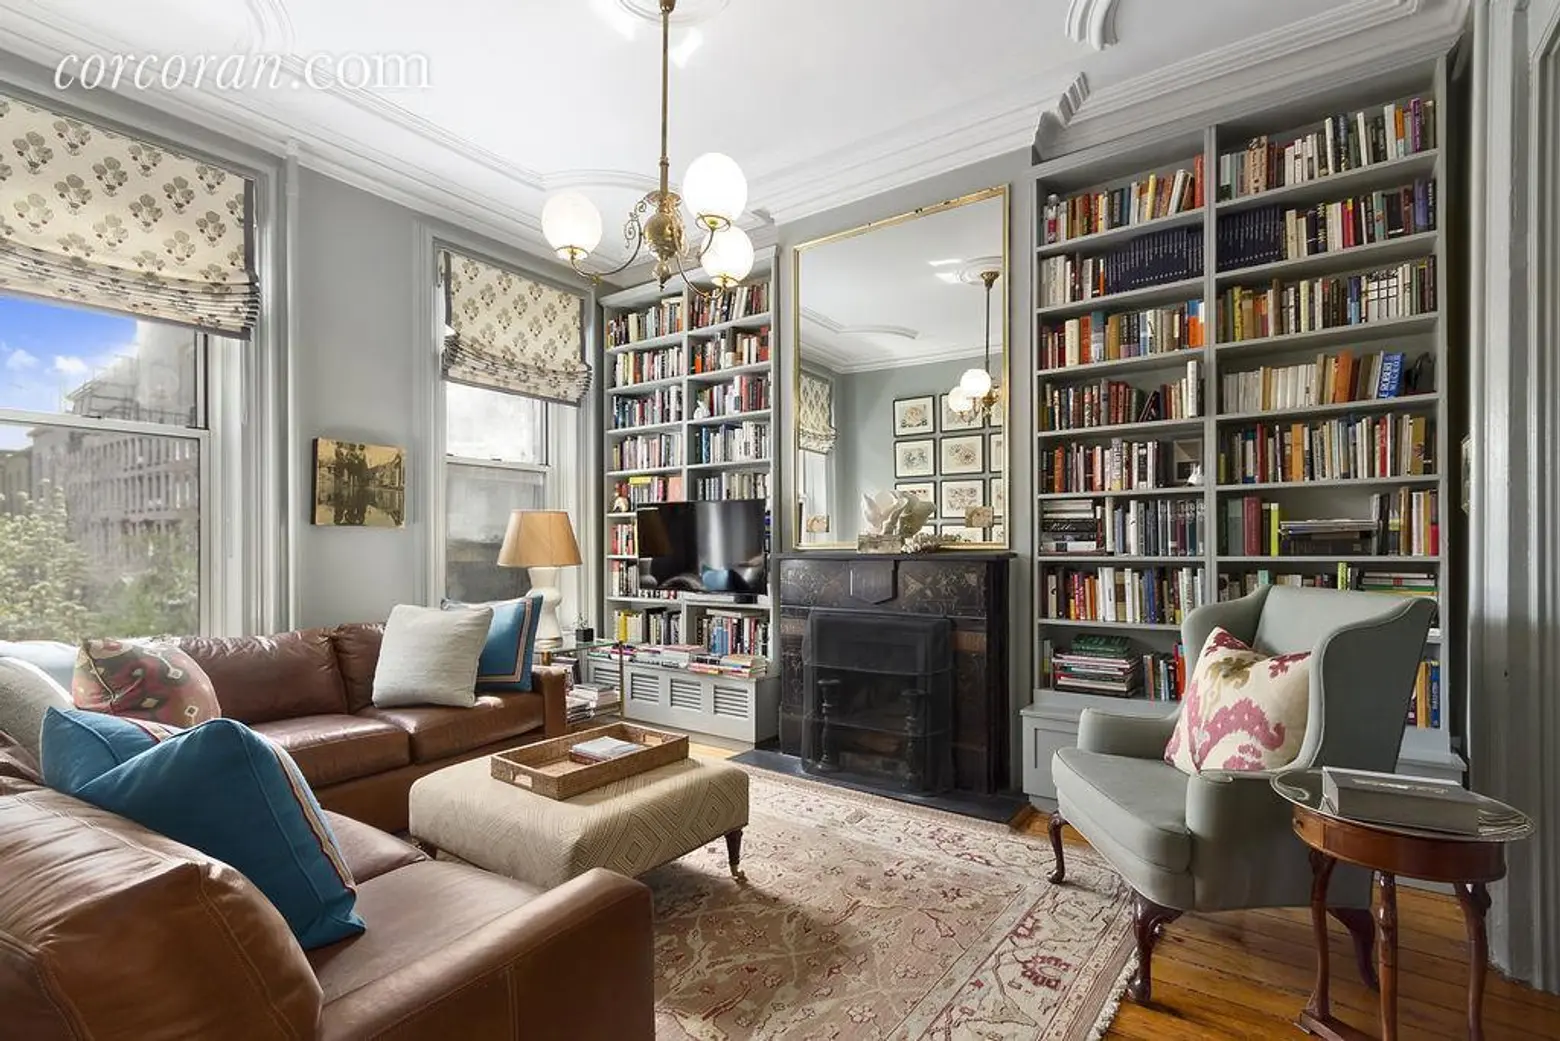 The Elegantly Designed Interiors at This Carroll Gardens Brownstone Can Be Yours For $3M